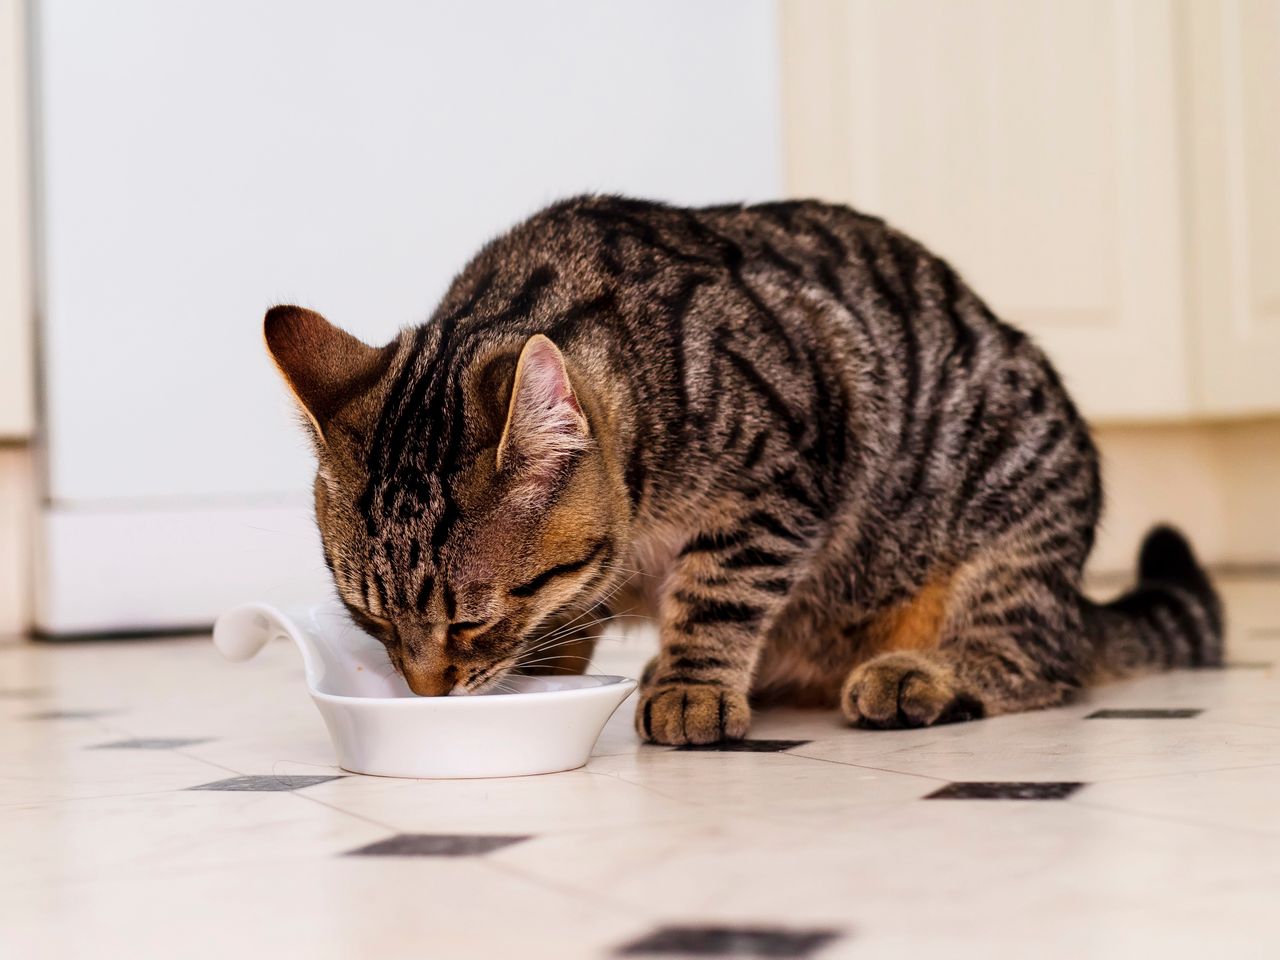 Where you place your cat's water bowl matters